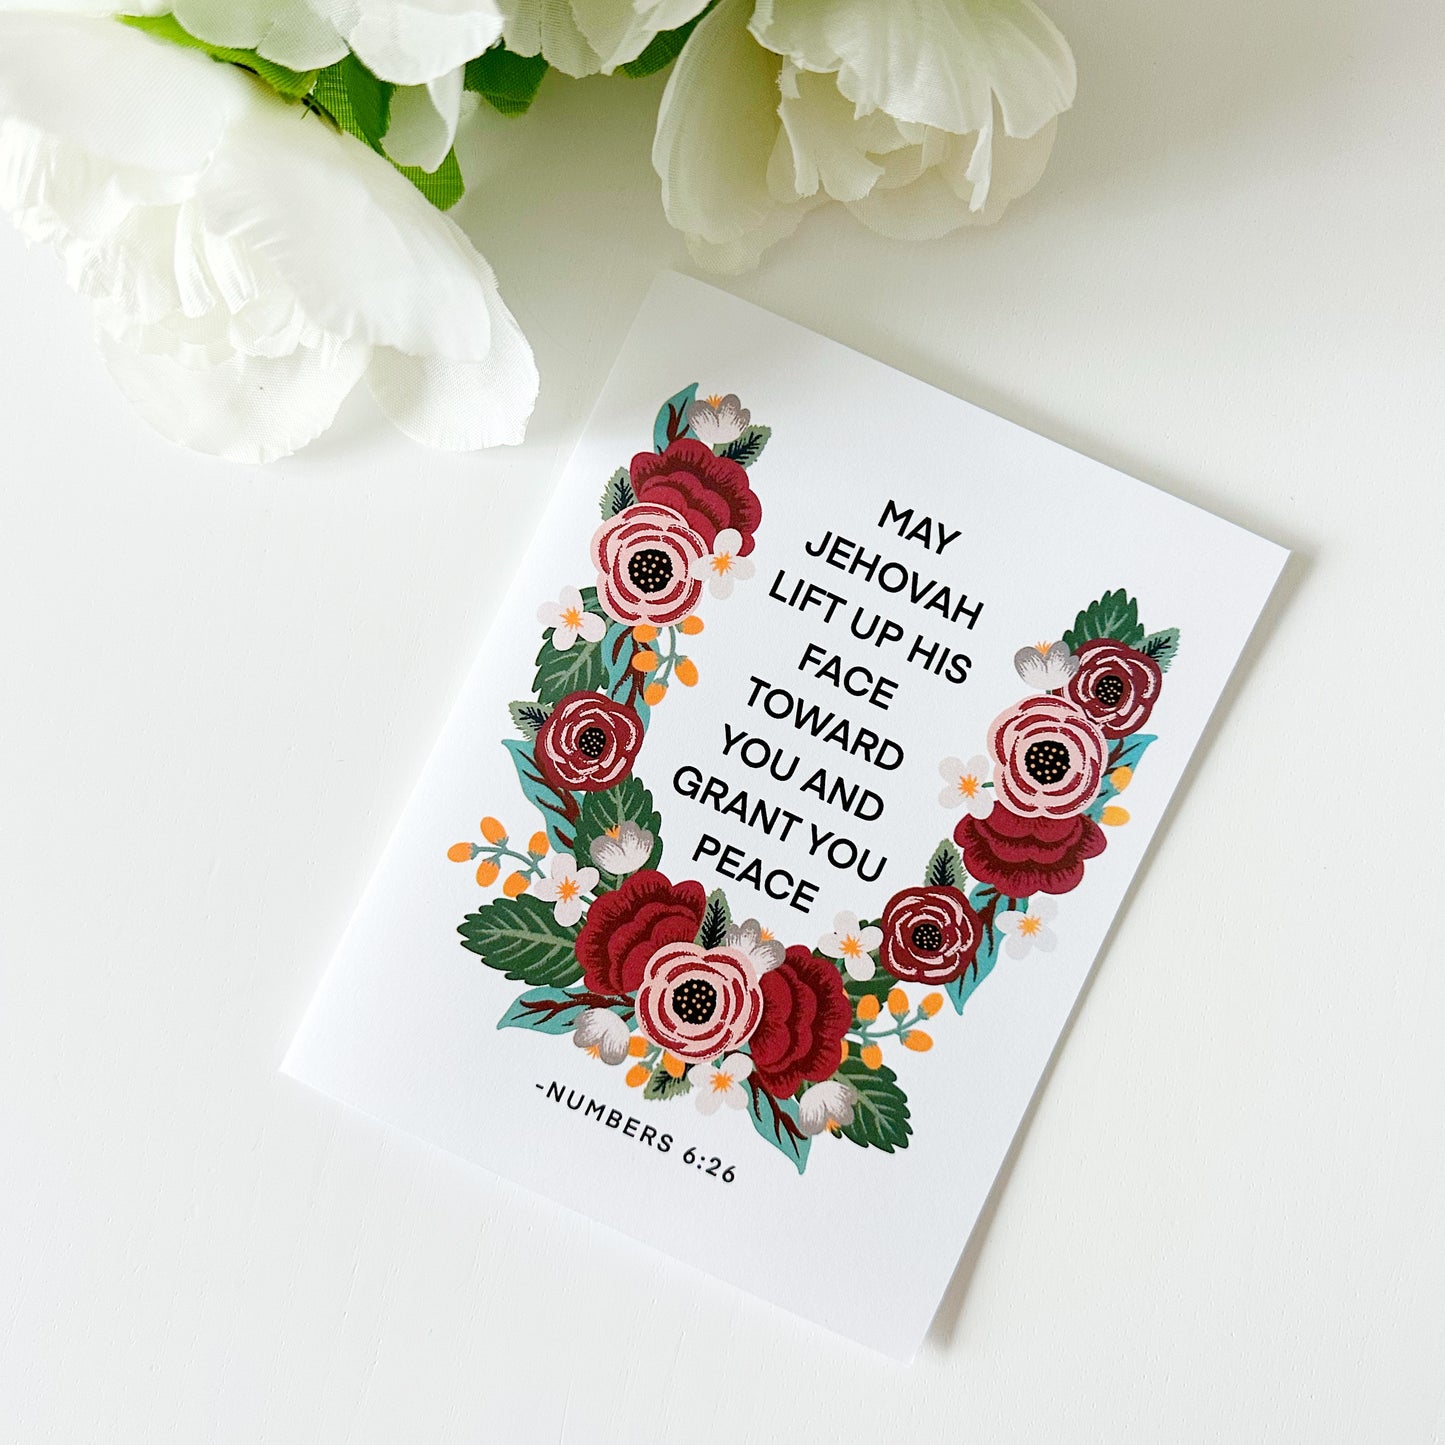 May Jehovah Grant You Peace Numbers 6:26 Greeting Card